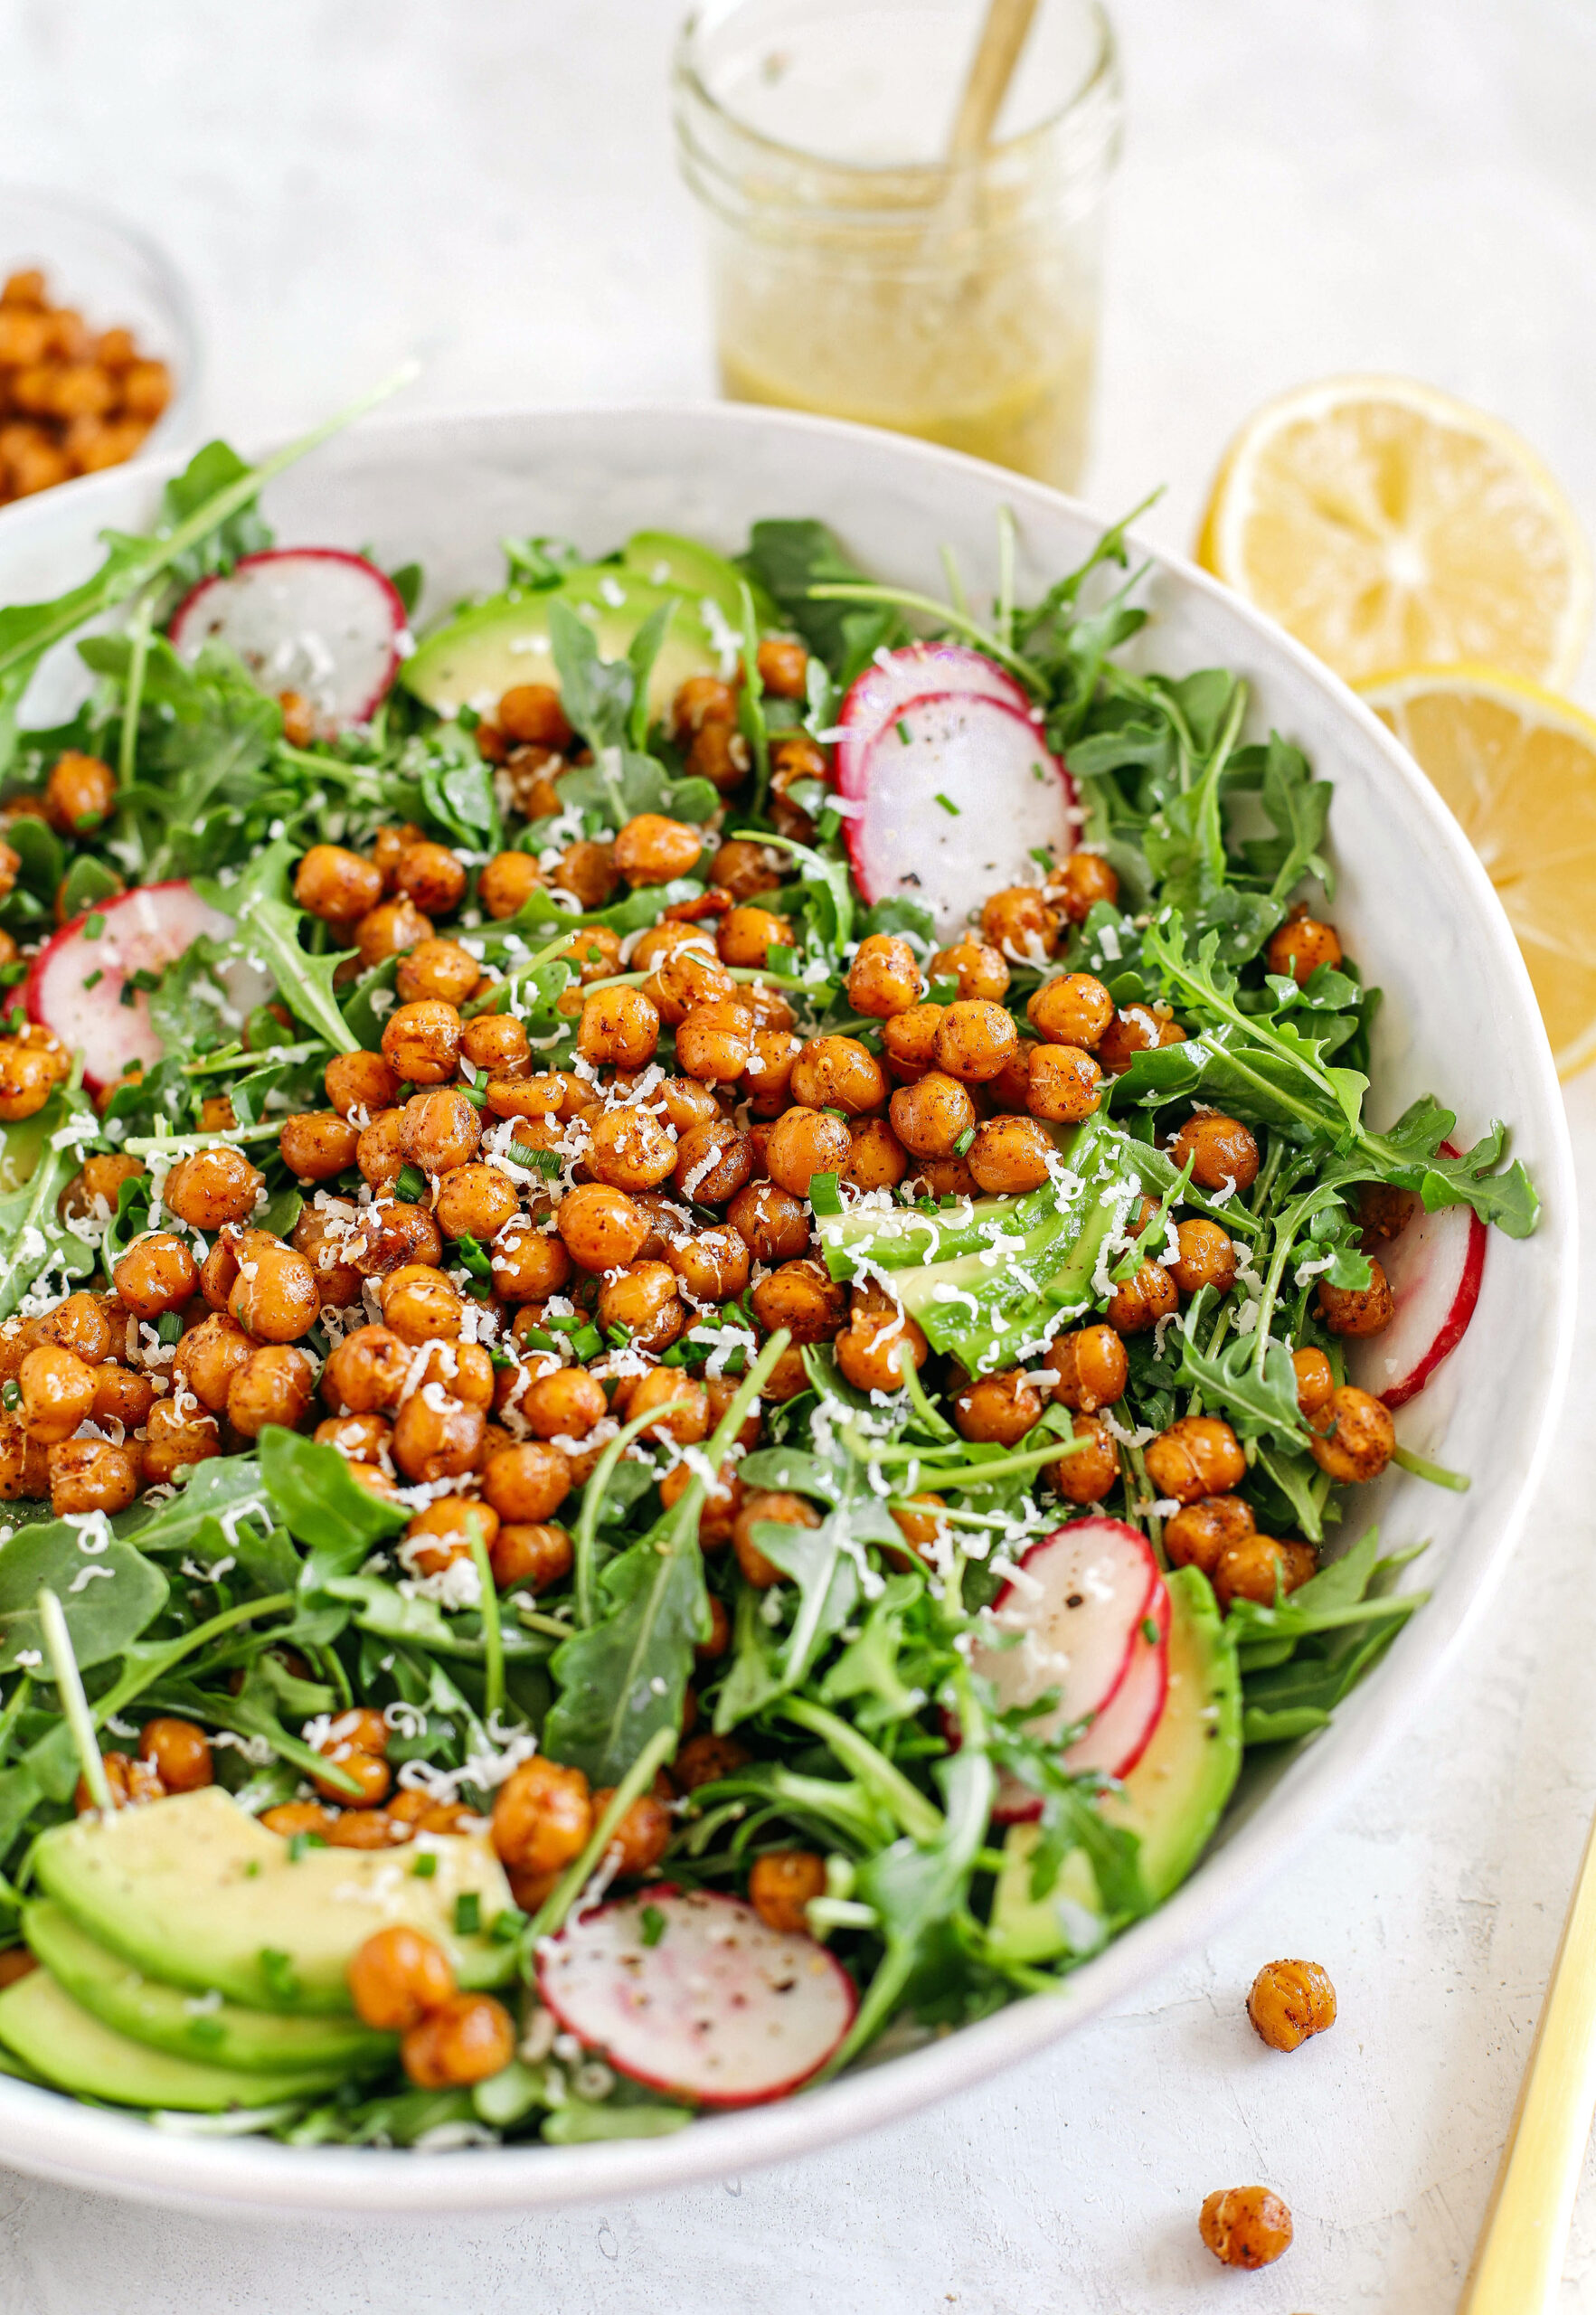 The most delicious Arugula Salad with Honey Roasted Chickpeas that are sweet, savory and perfectly crunchy!  Top with fresh veggies, avocado slices and my lemon dijon herb dressing!